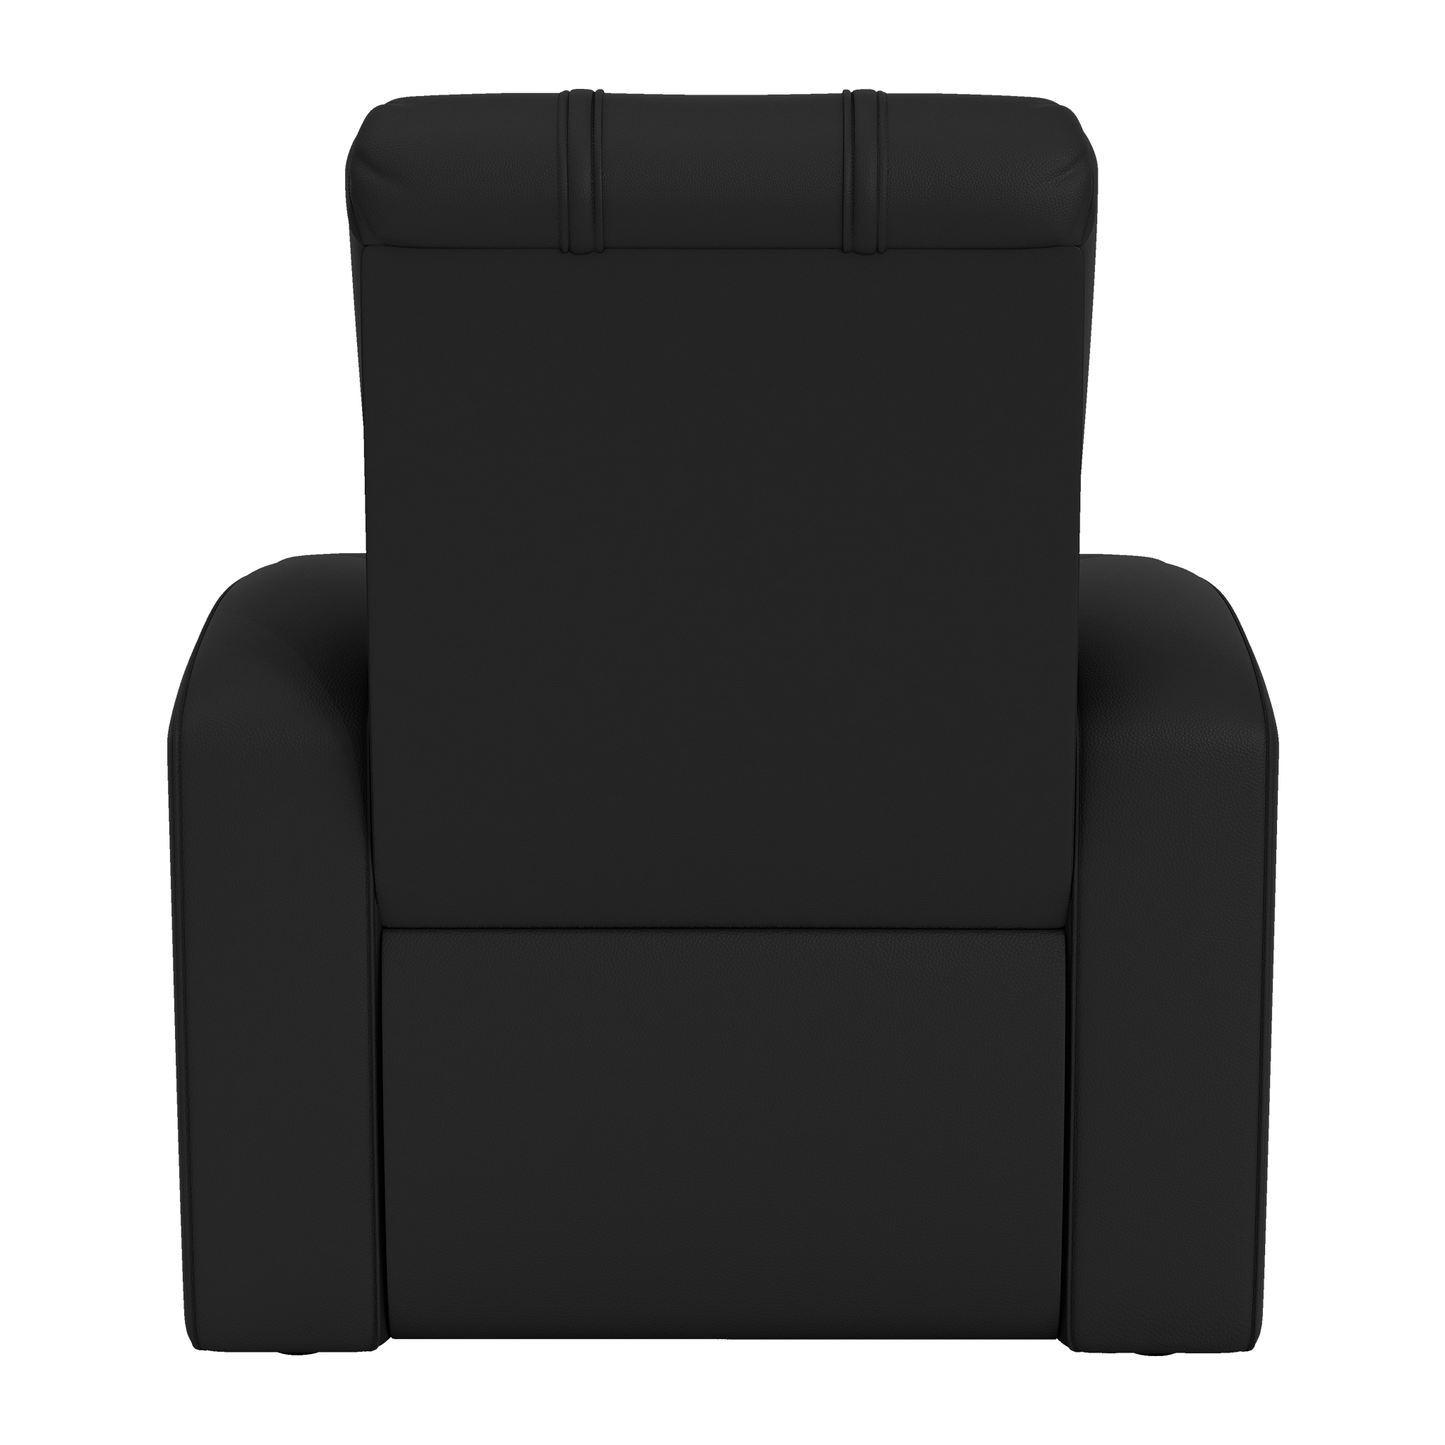 Relax Home Theater Recliner with St Louis Cardinals Champs 2011